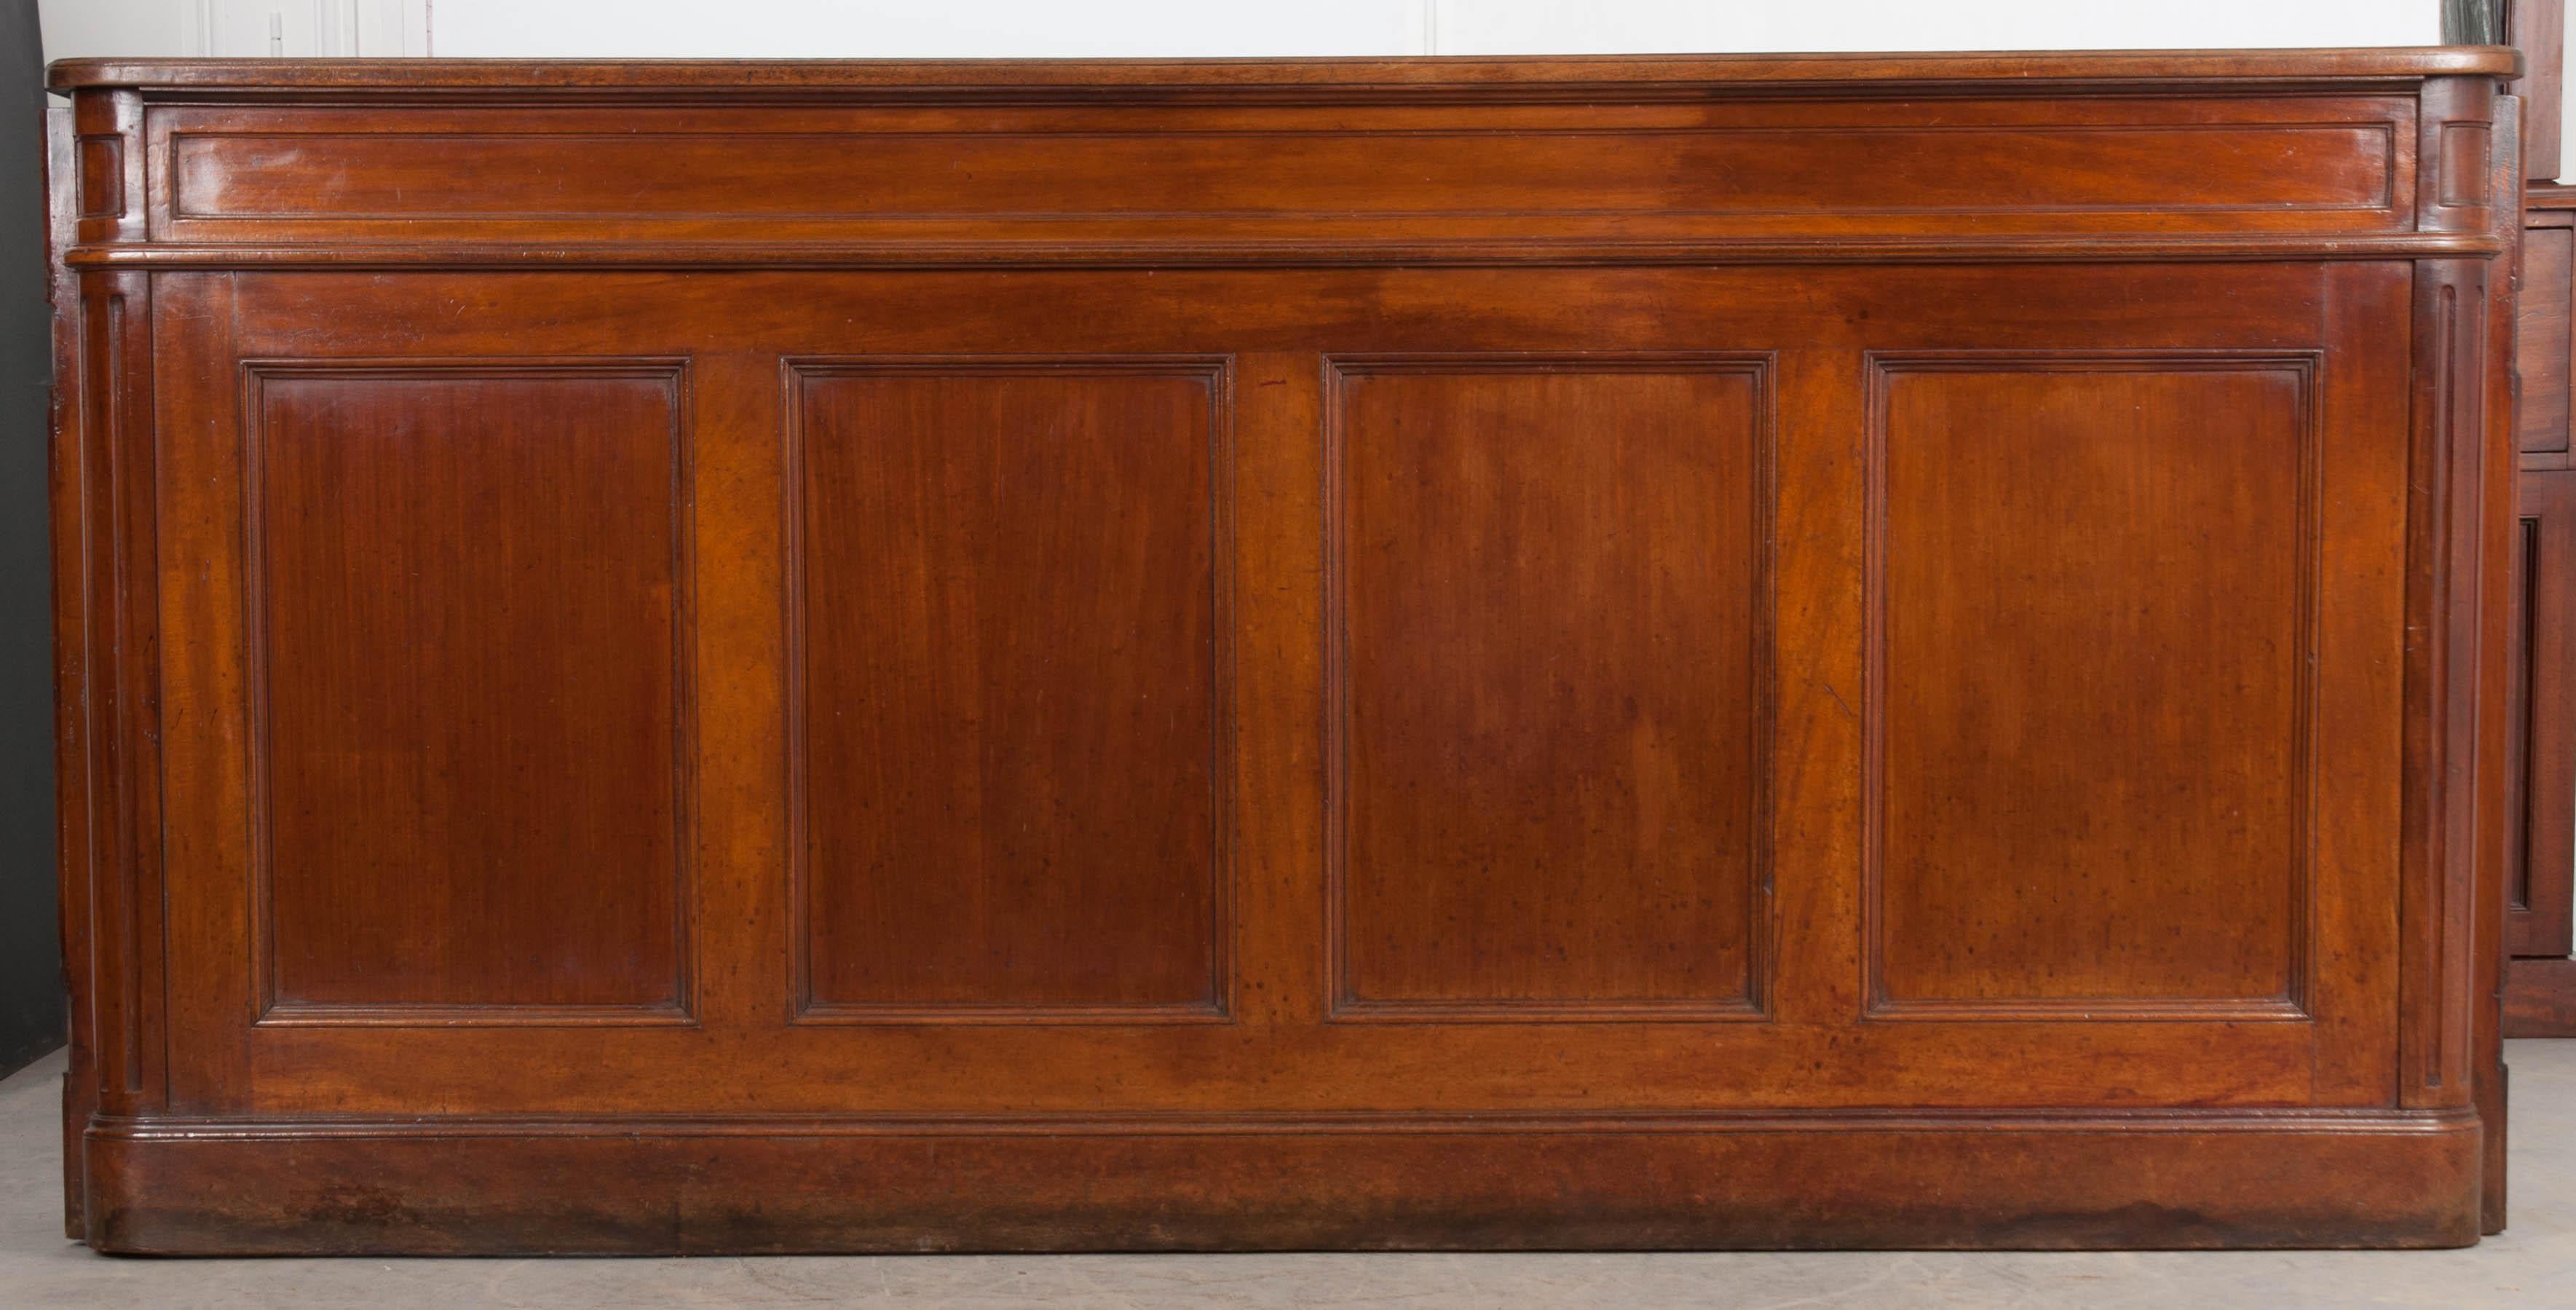 Tired of going to the bar? Bring home this English 19th century solid walnut pub-bar and you won’t have to leave the house! This spectacular piece was sourced from a pub in England and was made circa 1880. The front of the bar is styled with four